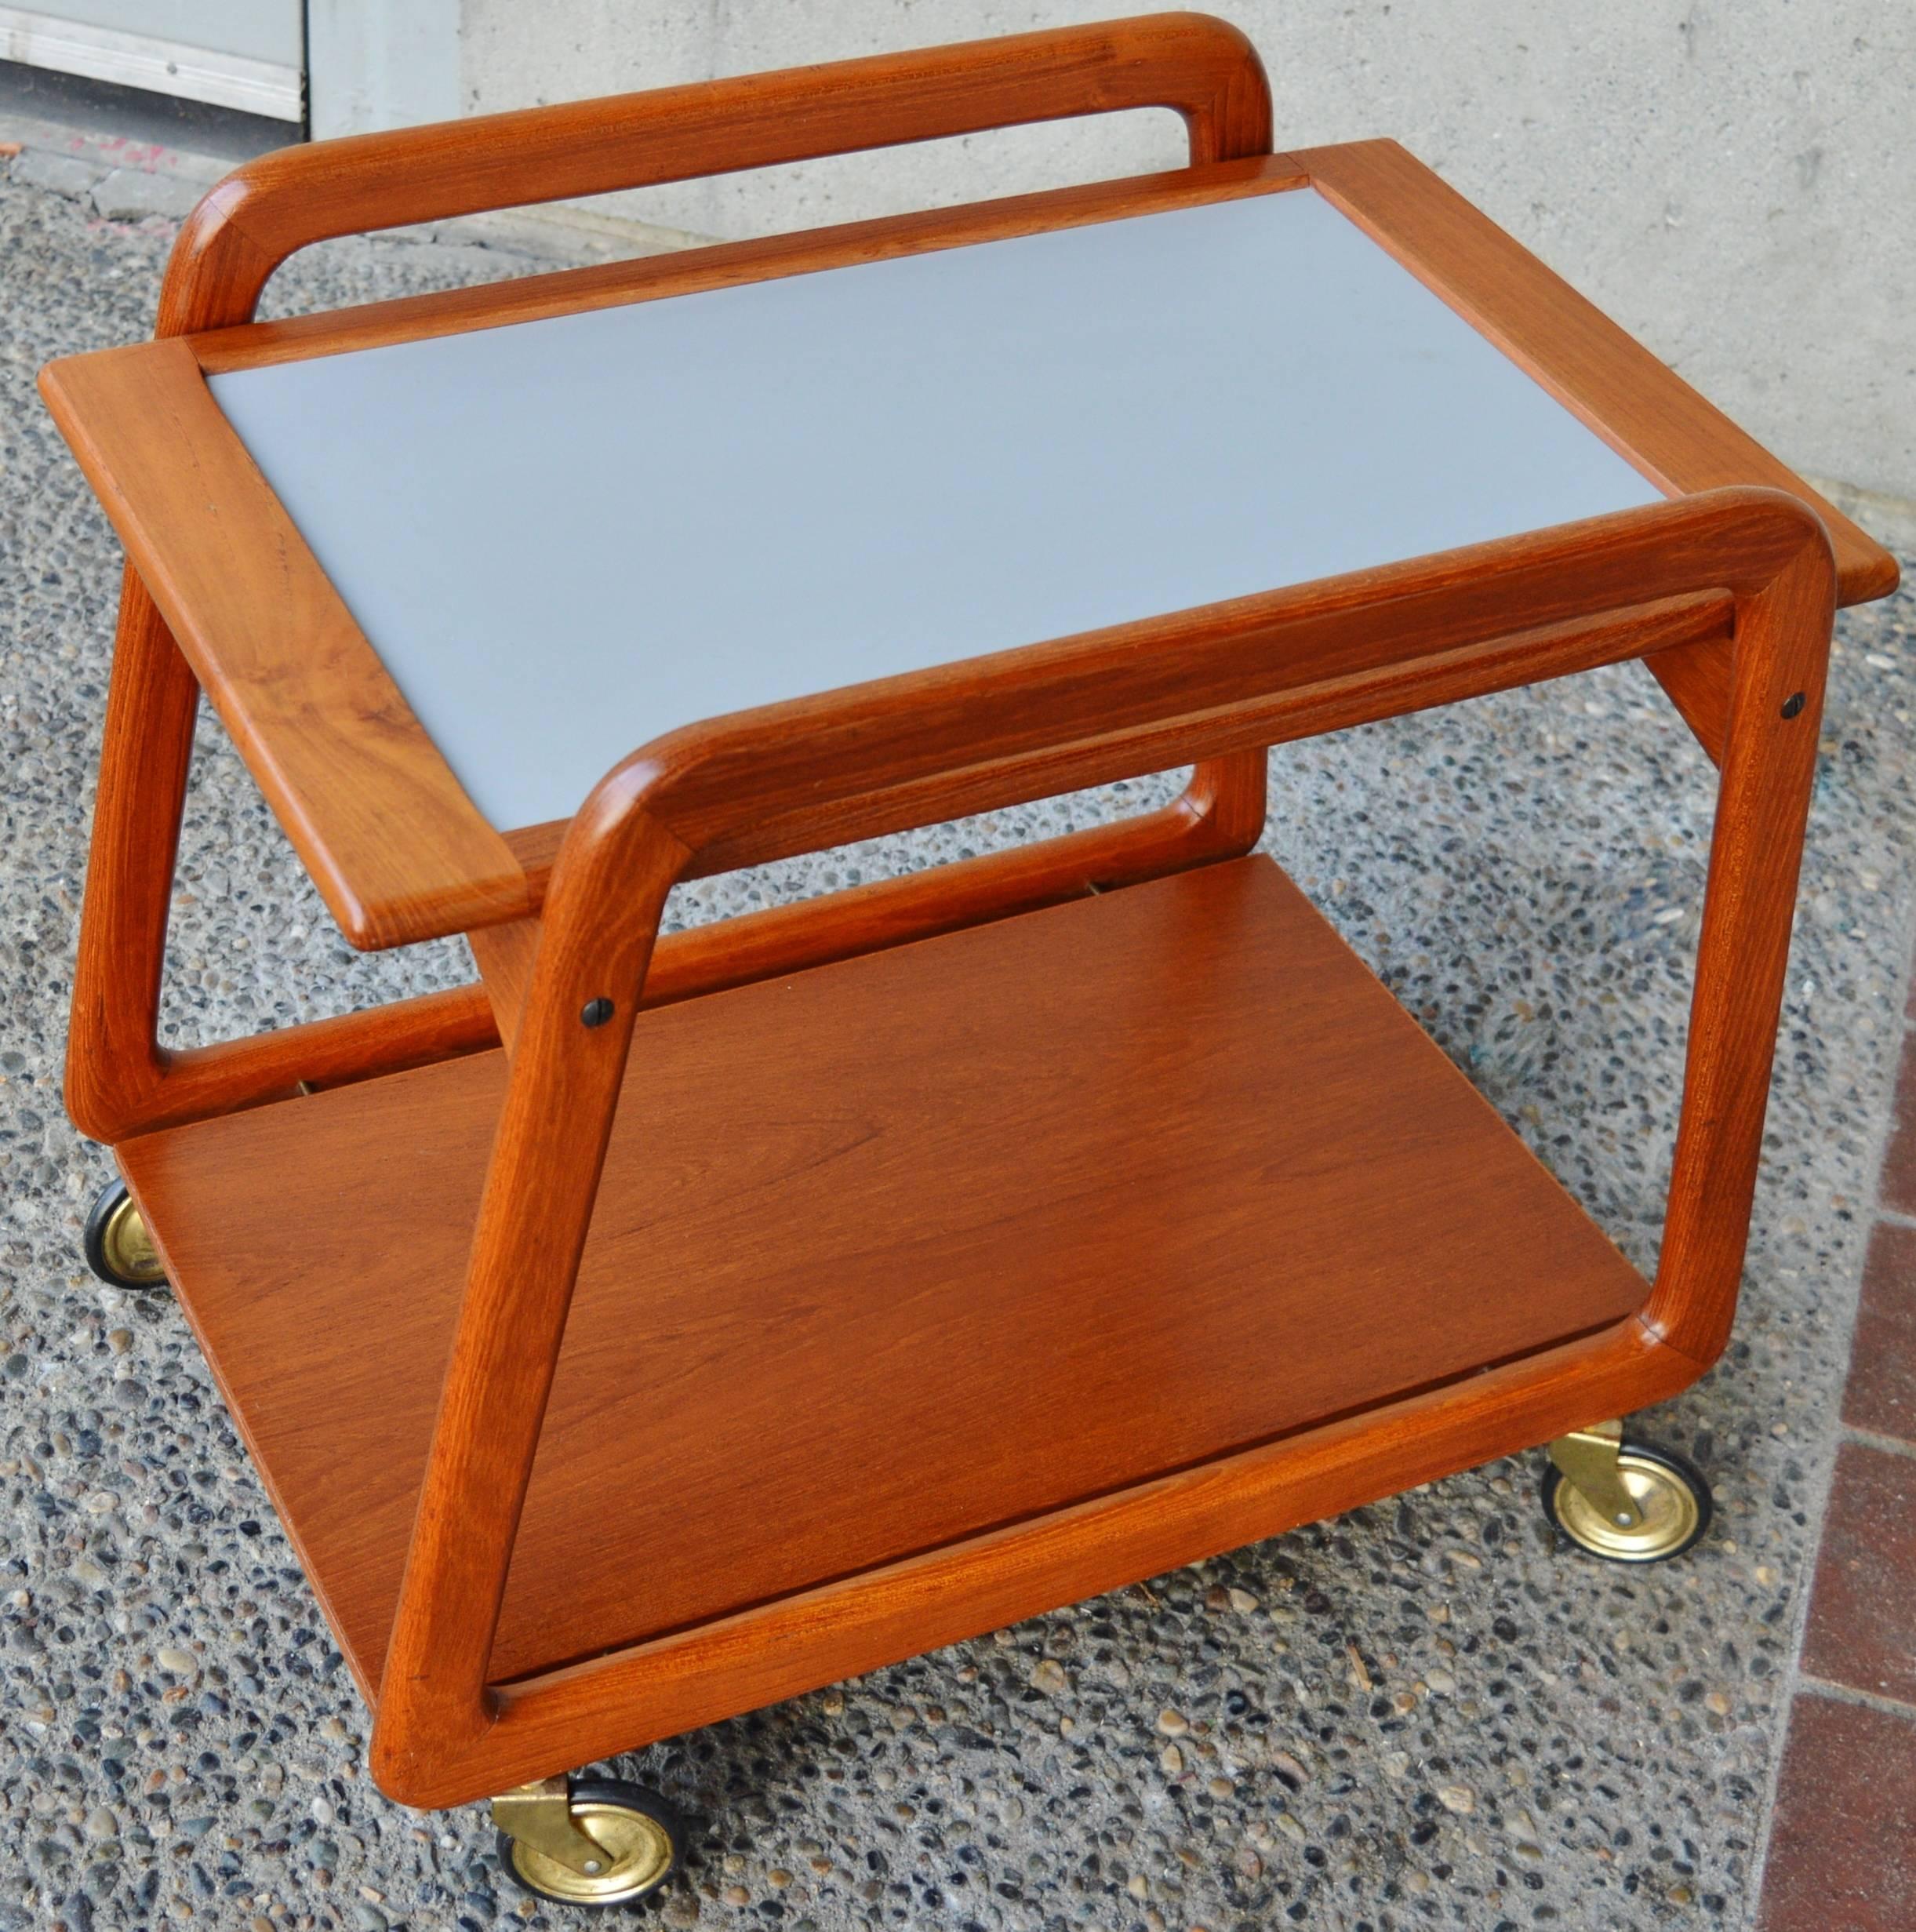 Mid-Century Modern Teak Reversible Tray Top Bar Cart or Tea Trolley by Sika Mobler